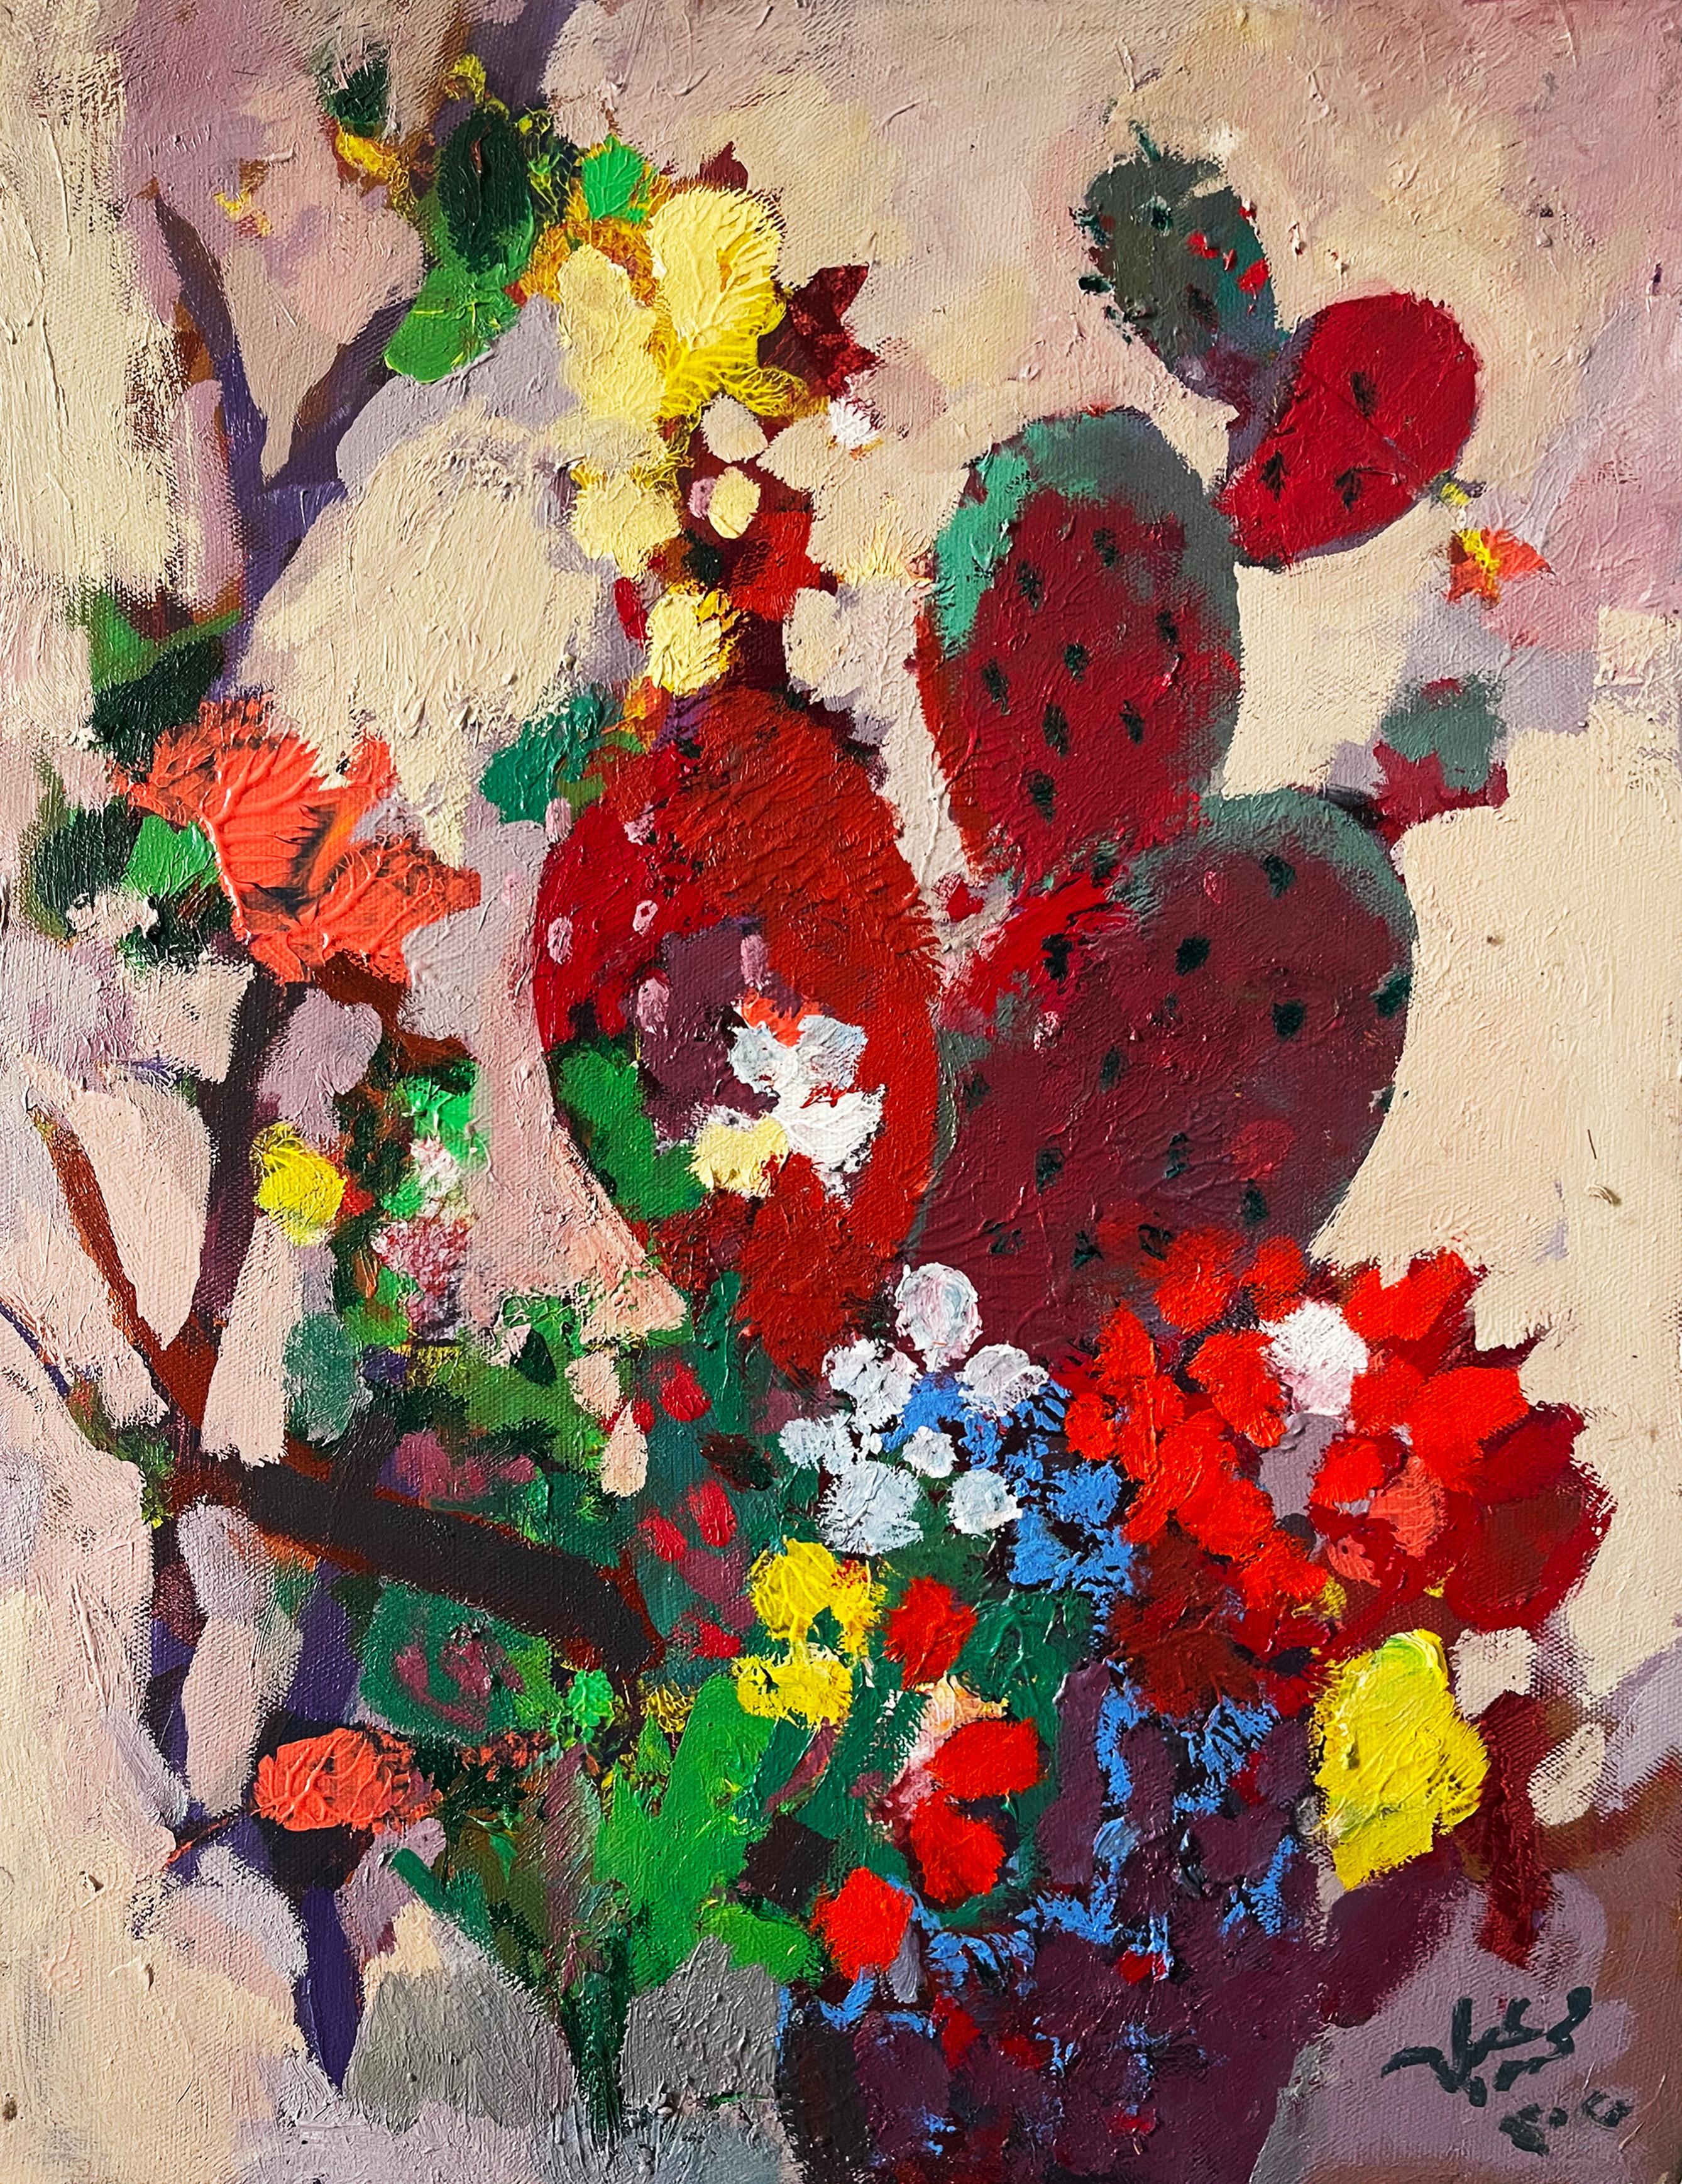 "Cactus 25" Oil Painting 20" x 16" inch by Mohamed Abla


Mohamed Abla was born in Mansoura (North of Egypt) in 1953. There he spent his childhood and finished school. In 1973 he moved to Alexandria to start a five-year art study at the faculty of